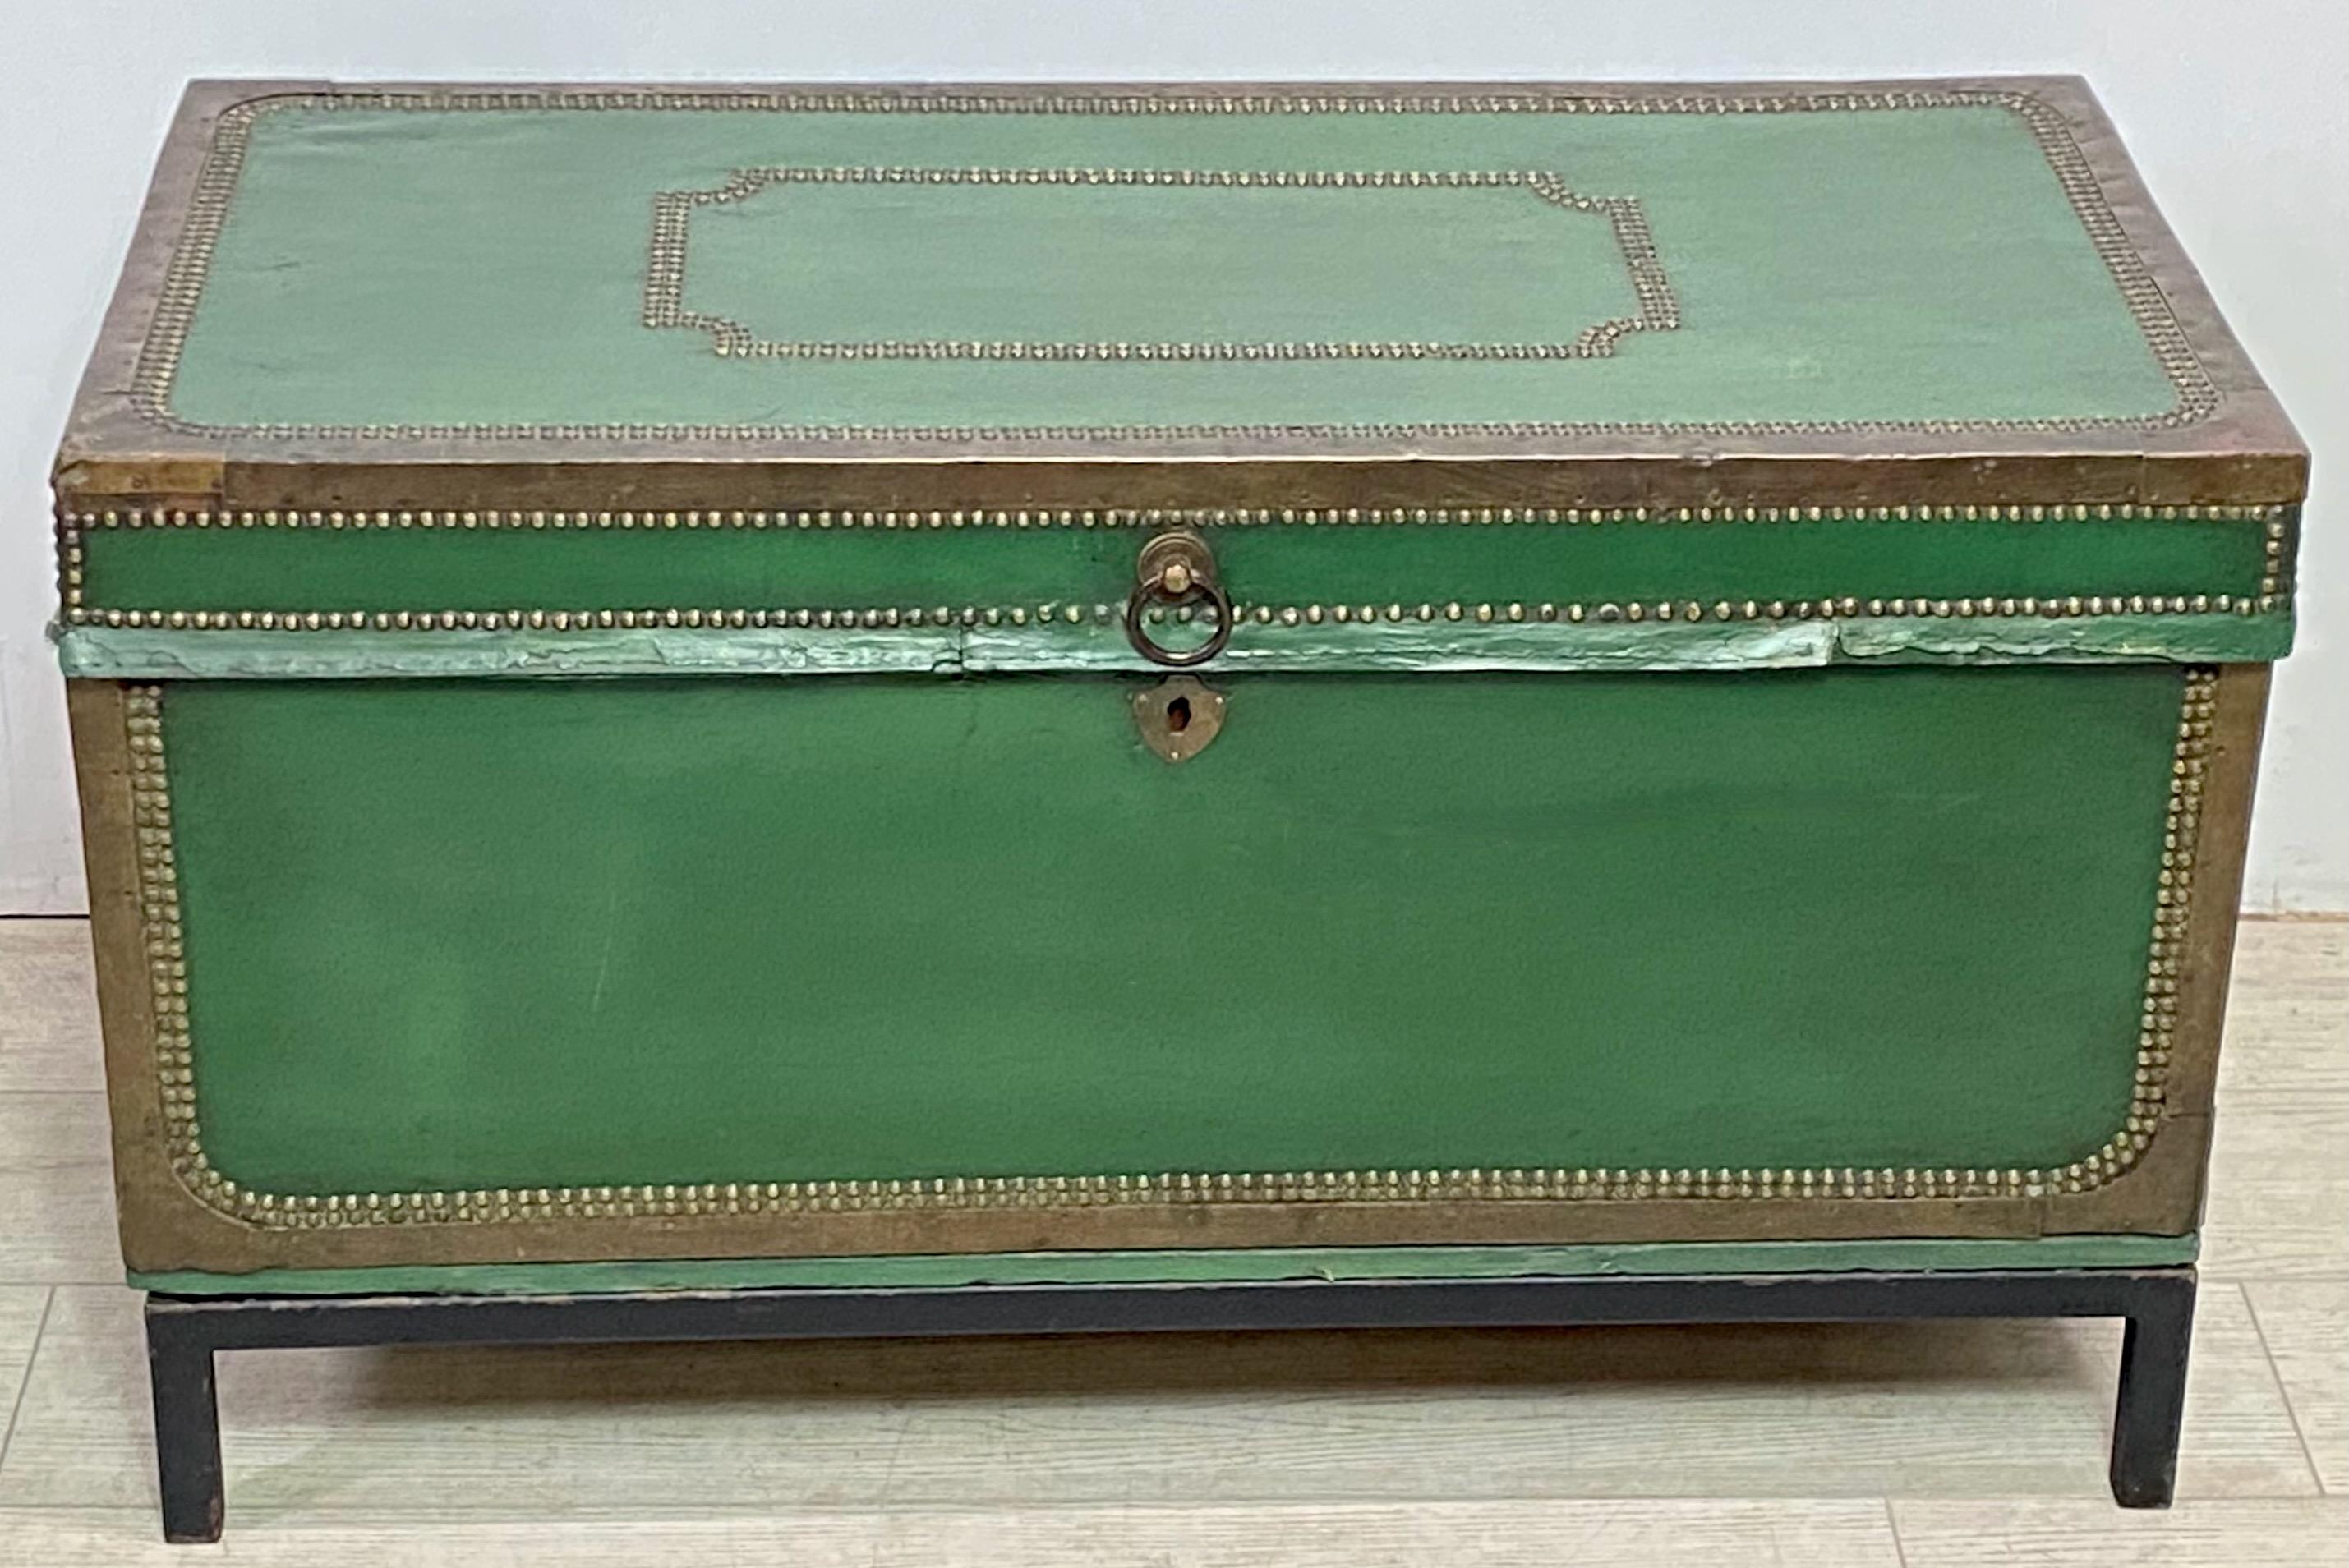 Chinese Export leather covered camphor wood trunk on custom made iron base.
Green leather with brass and nailhead detail.
Late 18th century / Early 19th century.
The stand measures 5 inches high.